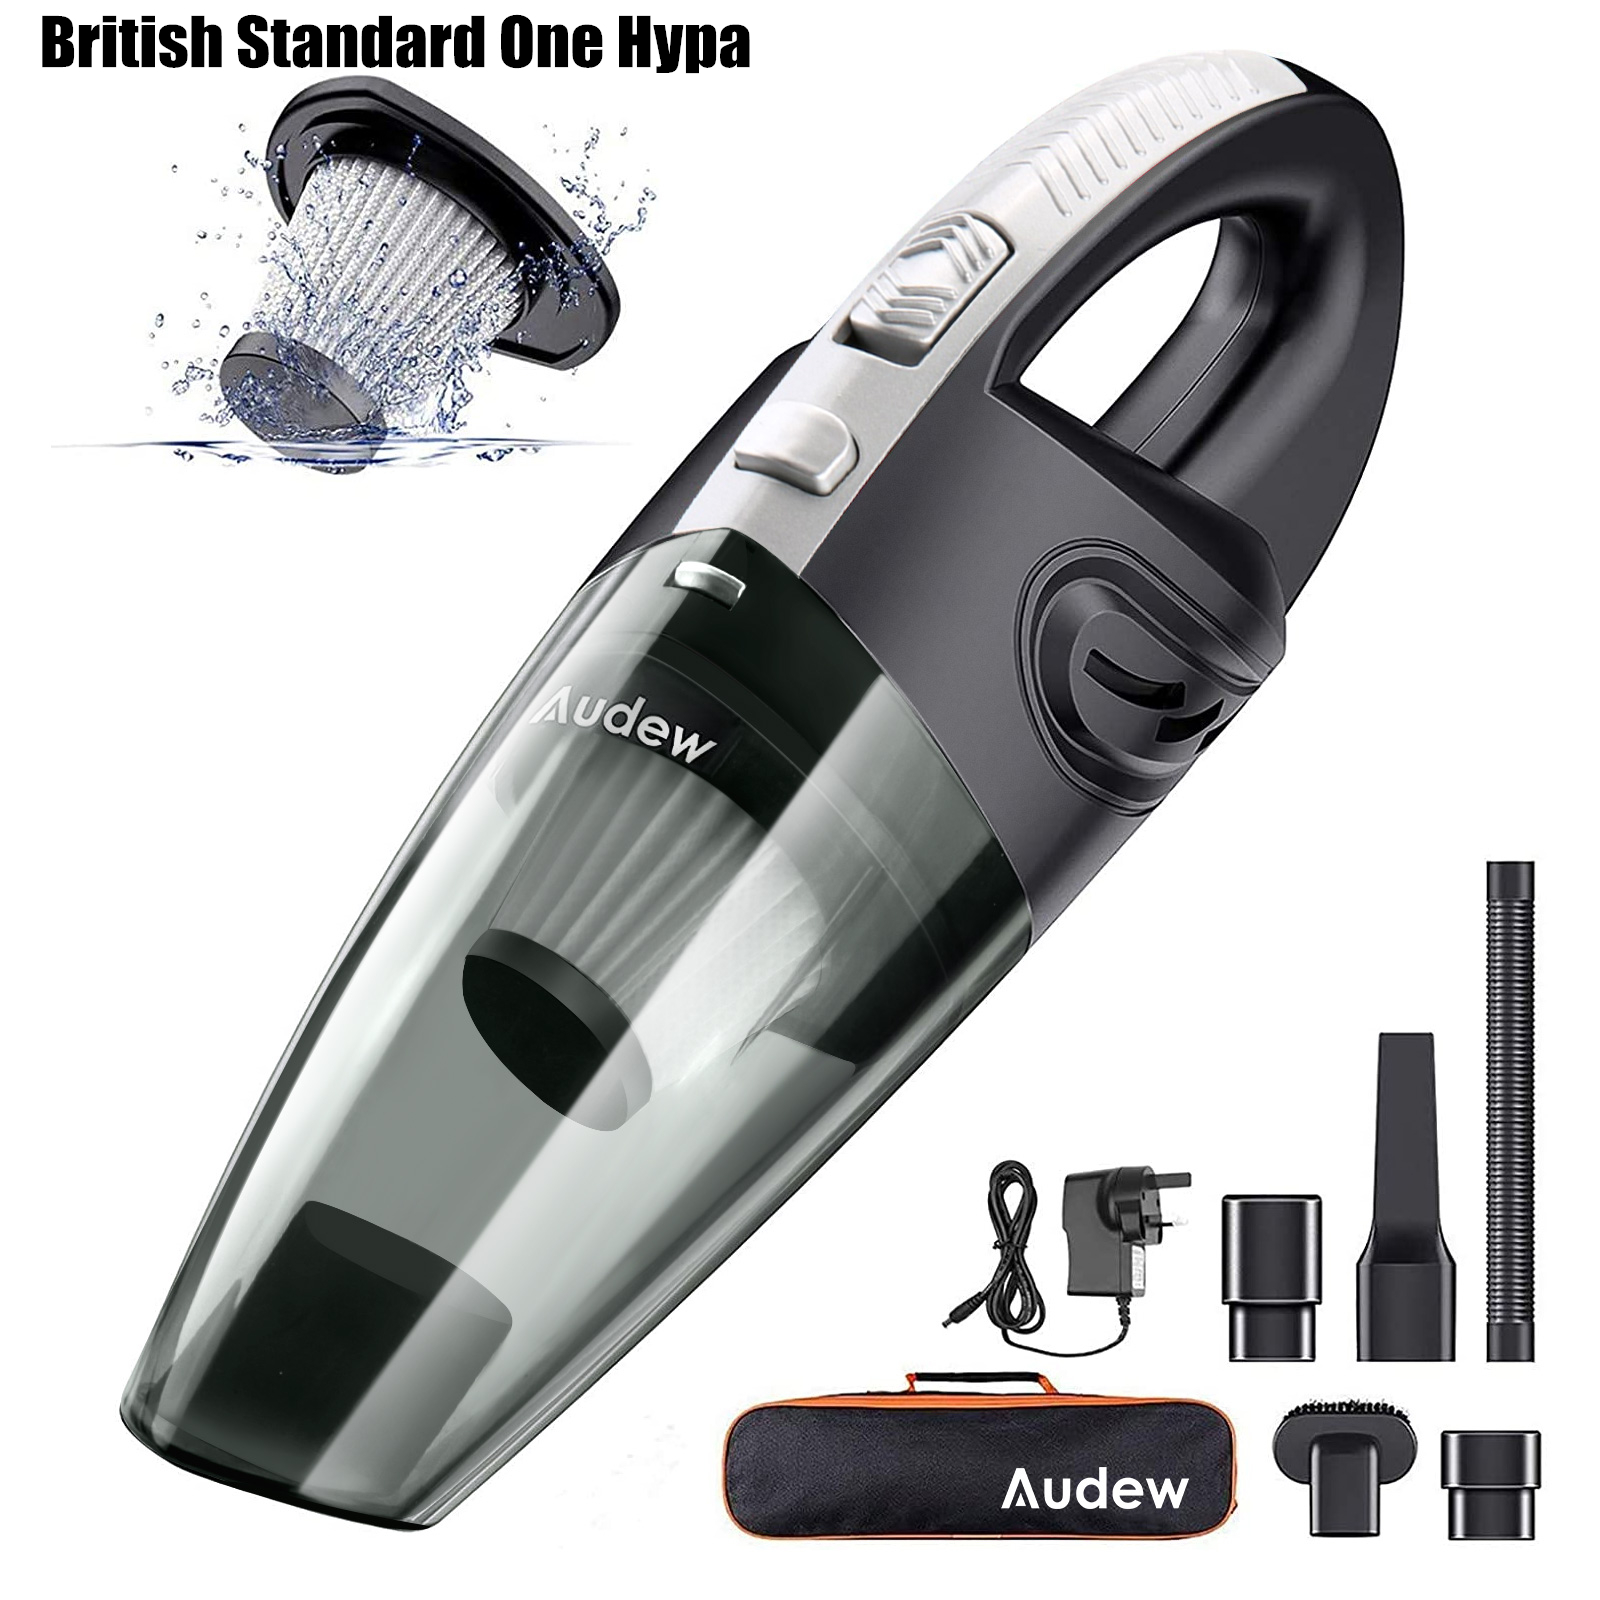 AUDEW 120W 5000Pa Cordless Vacuum Cleaner Handheld Rechargeable Wet/Dry for Car and Home - Auto GoShop